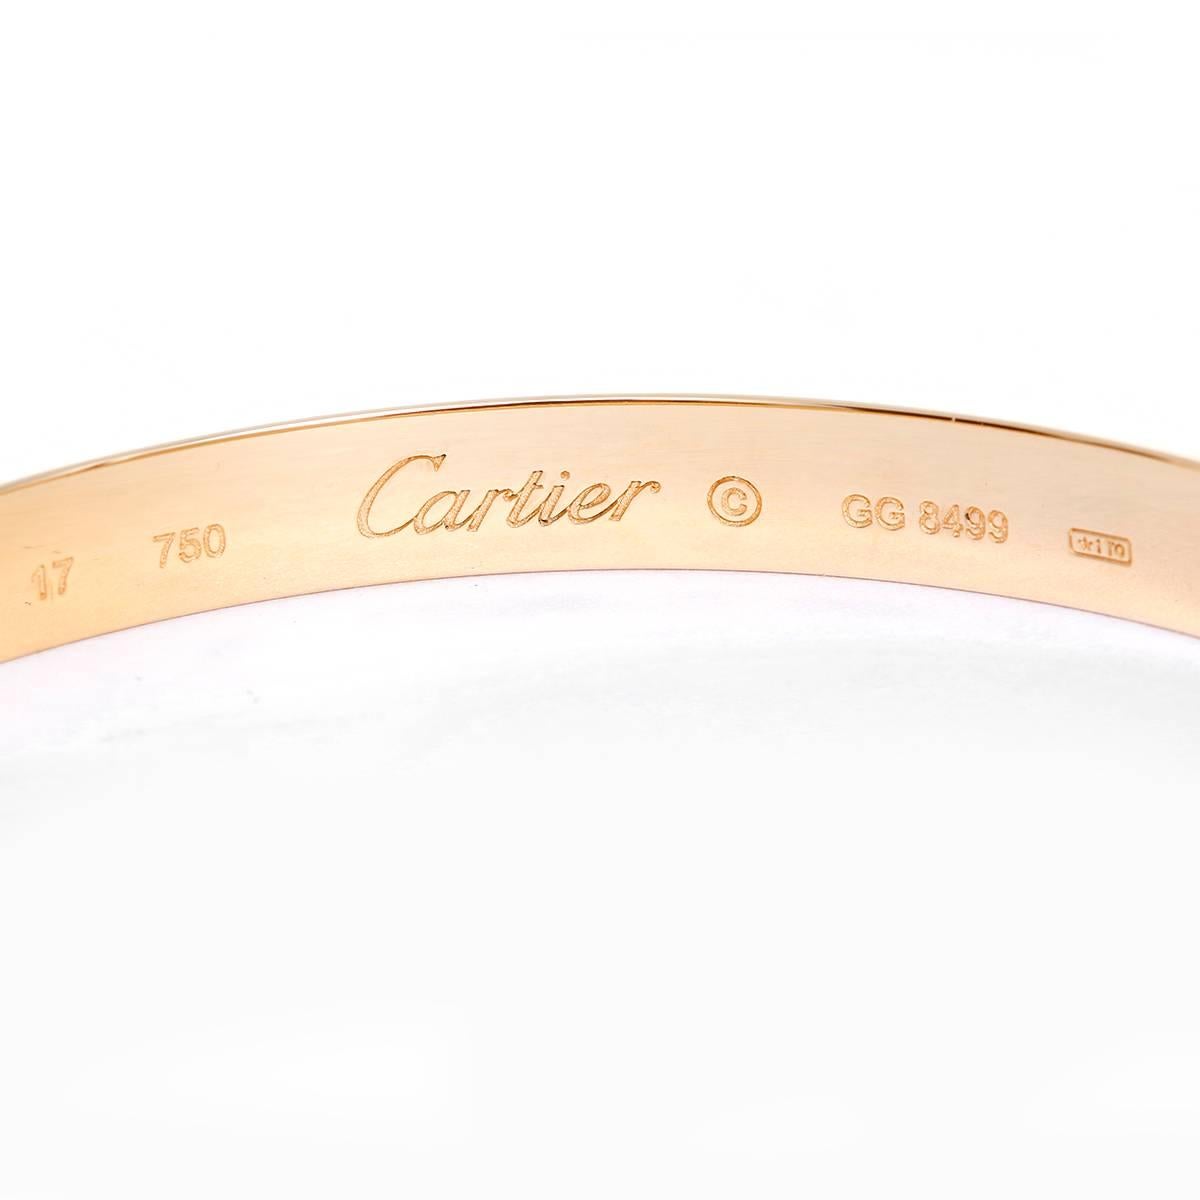 Cartier Love Bracelet 18k Yellow Gold Size 17 with Screwdriver - . This beautiful bracelet is stamped Cartier, 17, 750  and GG8499.  This is a great piece for everyday as well as dress. Authenticity guaranteed. Like new condition with no dings or